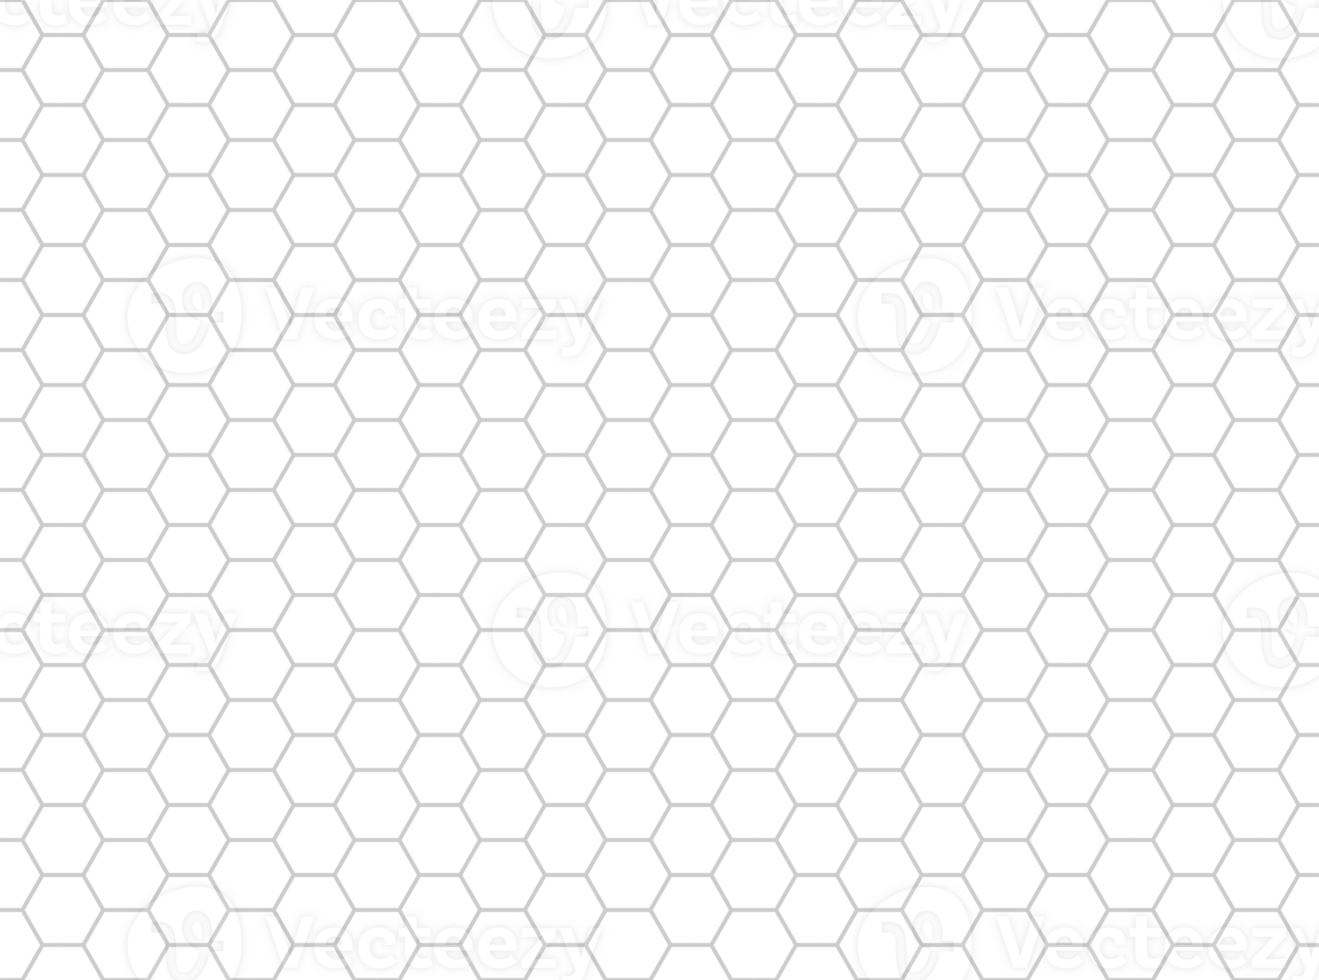 Seamless Honeycomb Shape Motifs Pattern, Beehive or Bee House Form, can use for Decoration, Ornate, Carpet Pattern, Fashion, Fabric, Textile, Tile, Mosaic, Wallpaper, Wrapping Cover, Background, etc. png